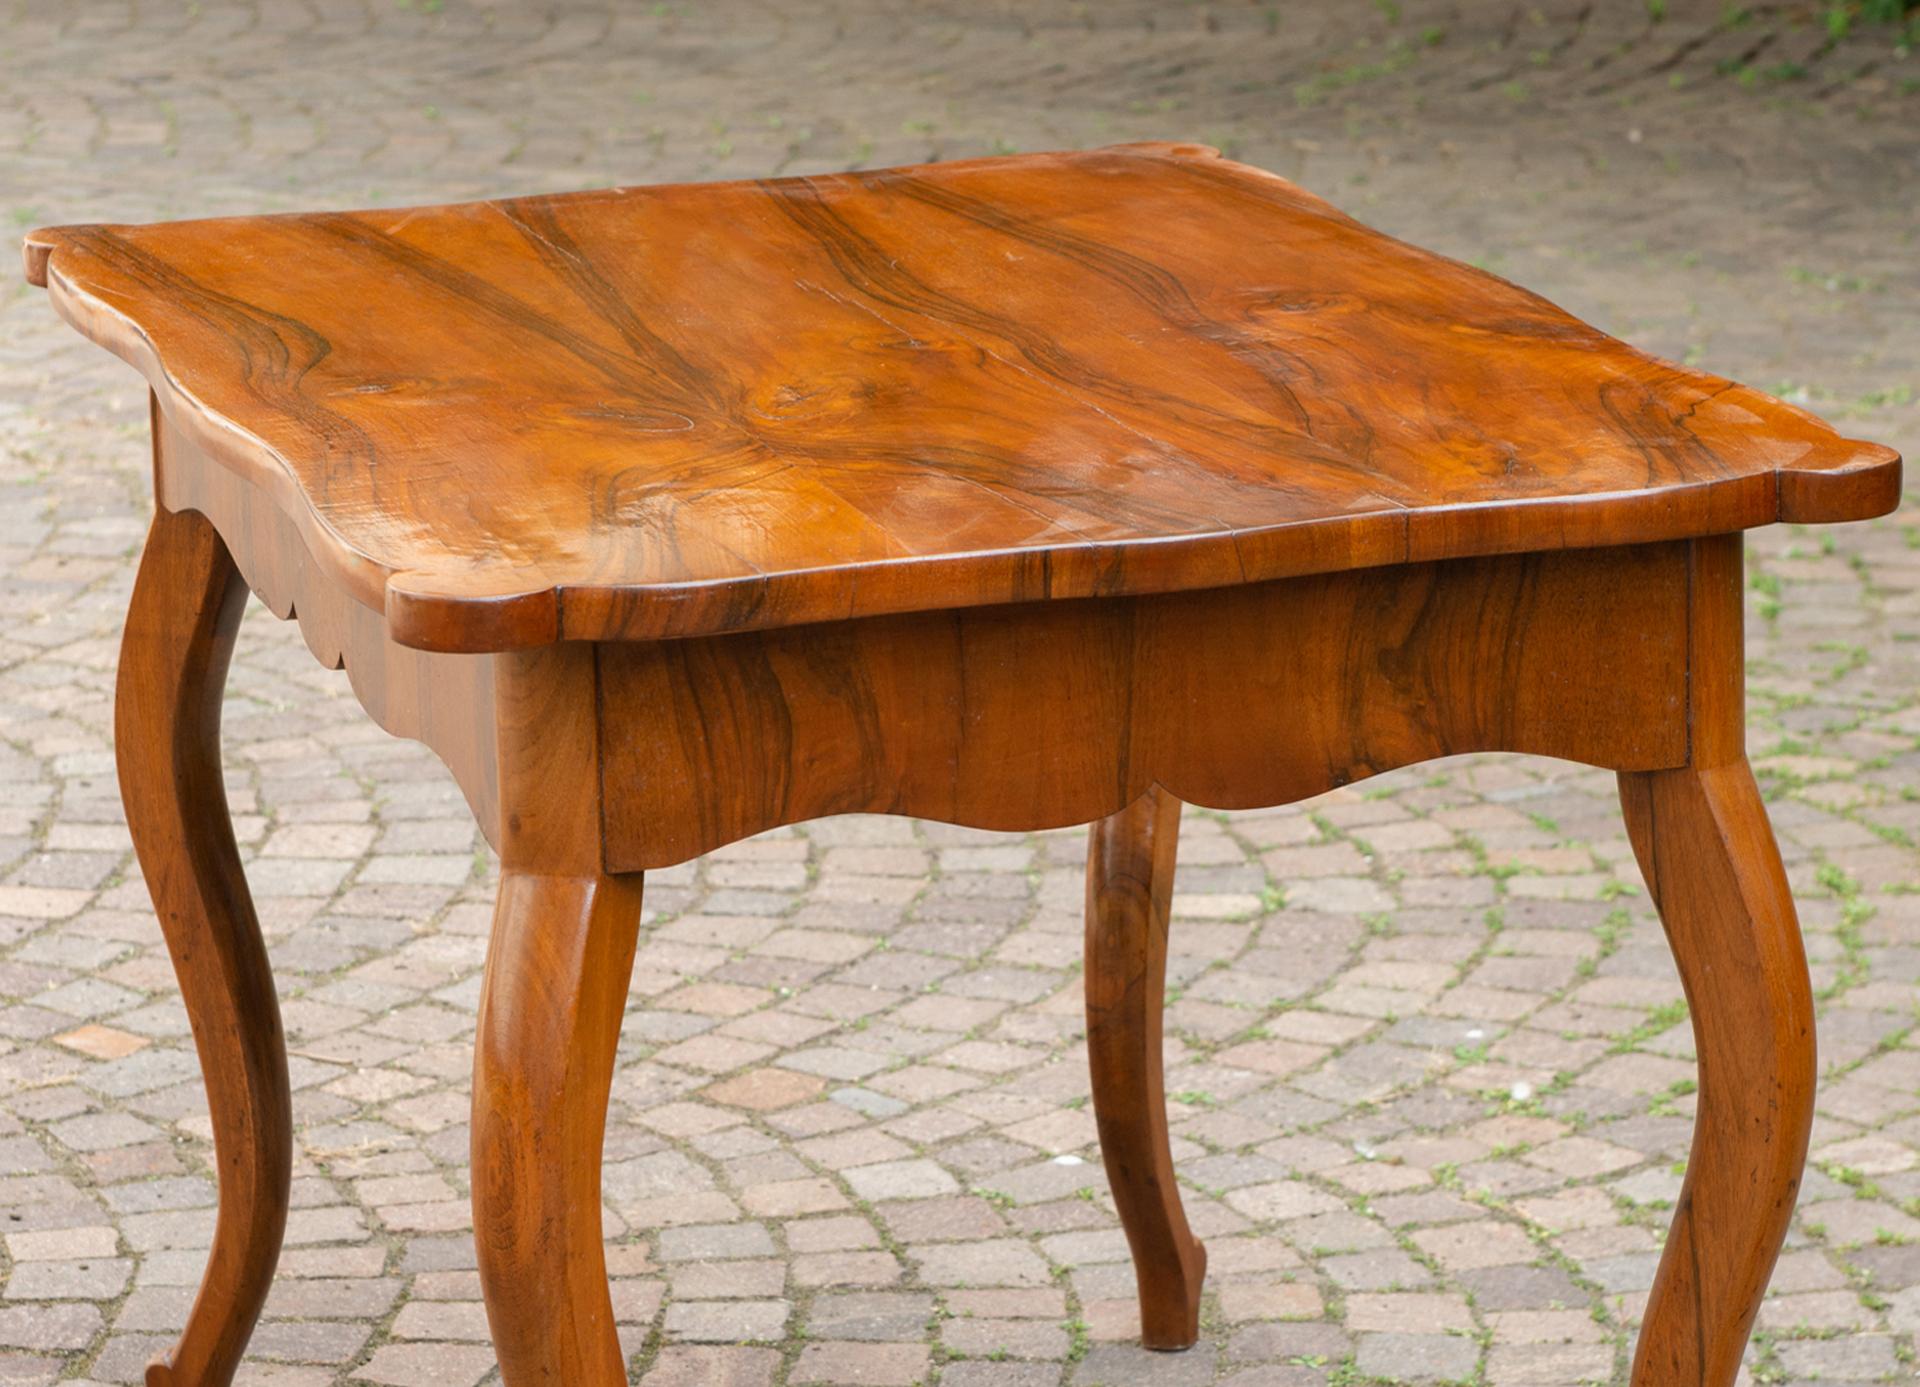 Elegant Biedermeier desk with drawer, perfect as center table.  Beautiful walnut wood, whose grains form a very interesting abstract design on the top.  The drawer in the edge around the top is almost invisible.
That's a good price for closing